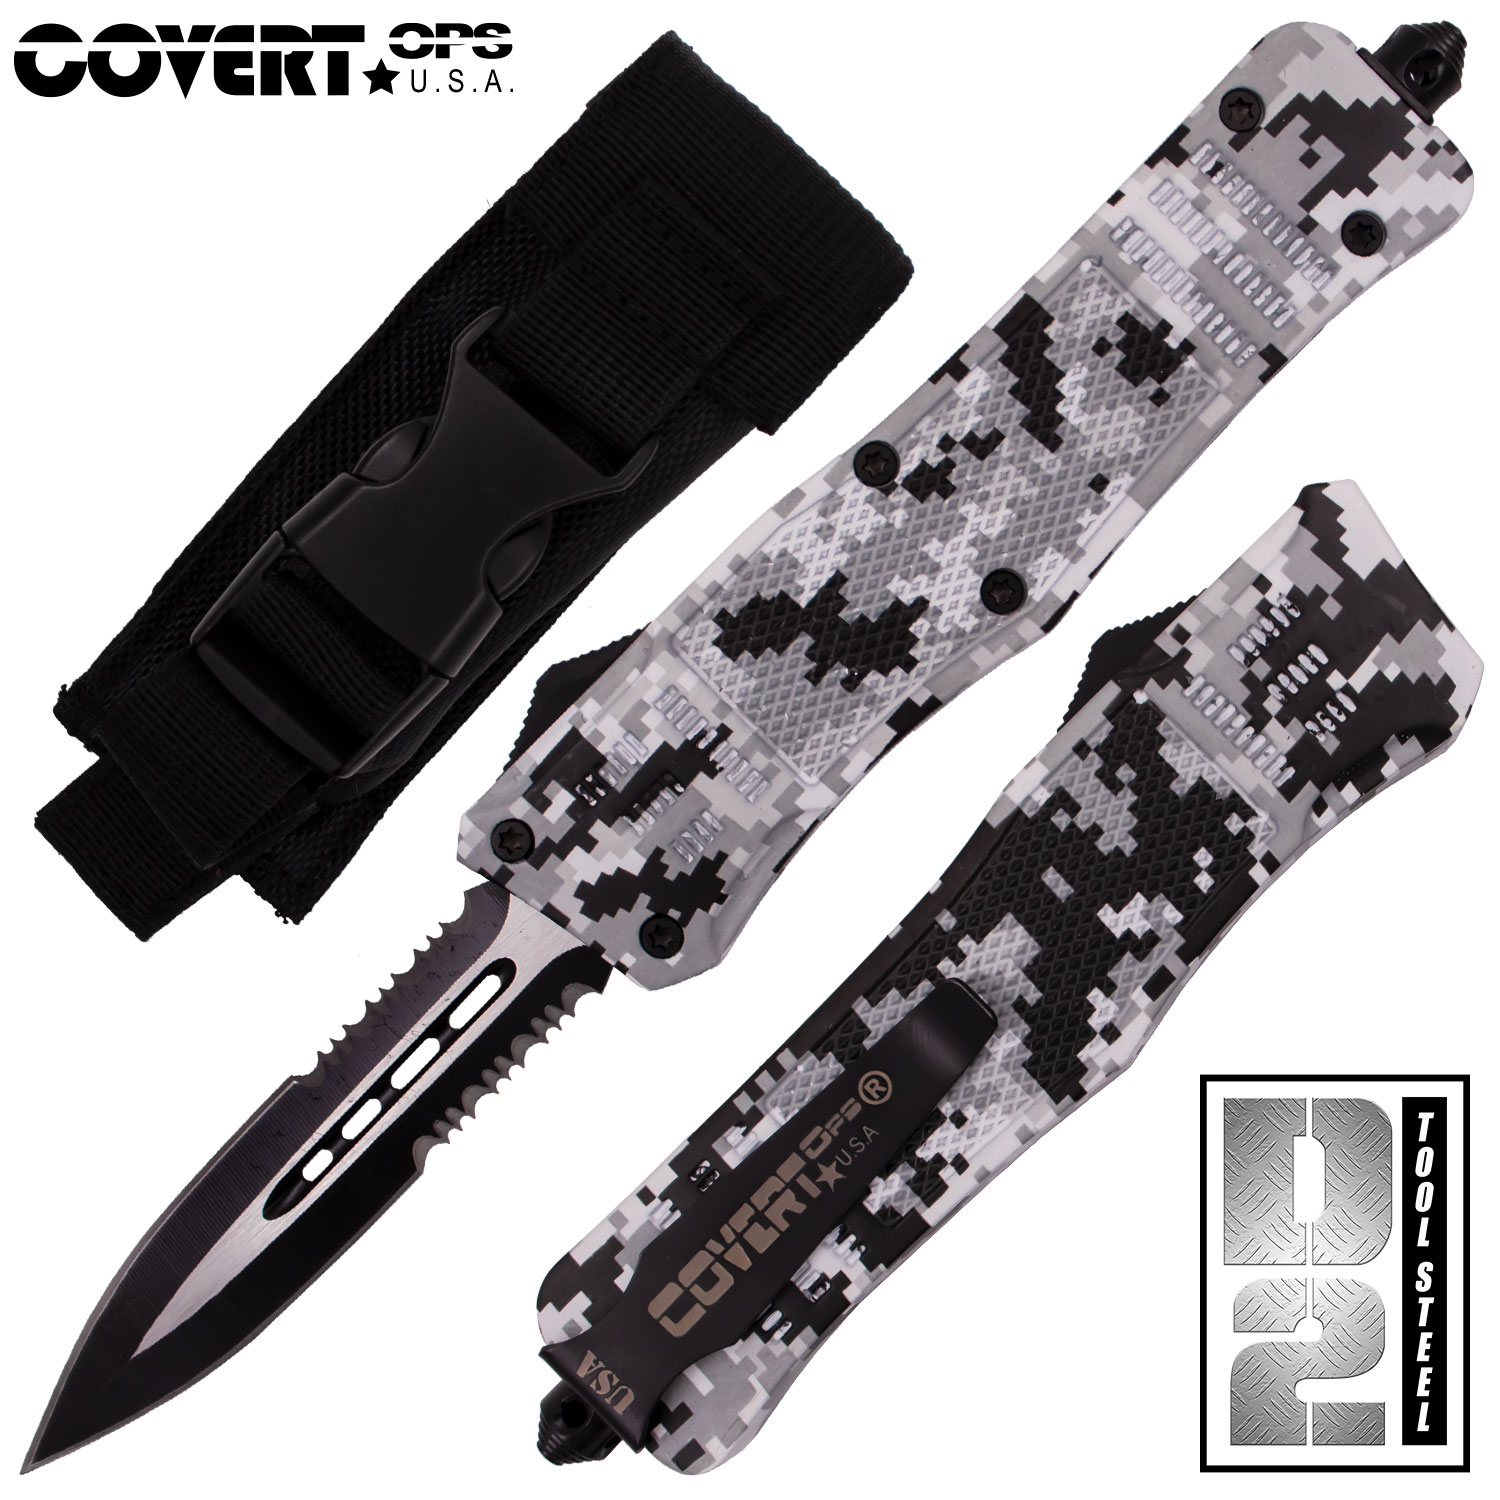 Covert OPS USA OTF Automatic Knife 9 inch WCamo D2 Steel Blade DEdge